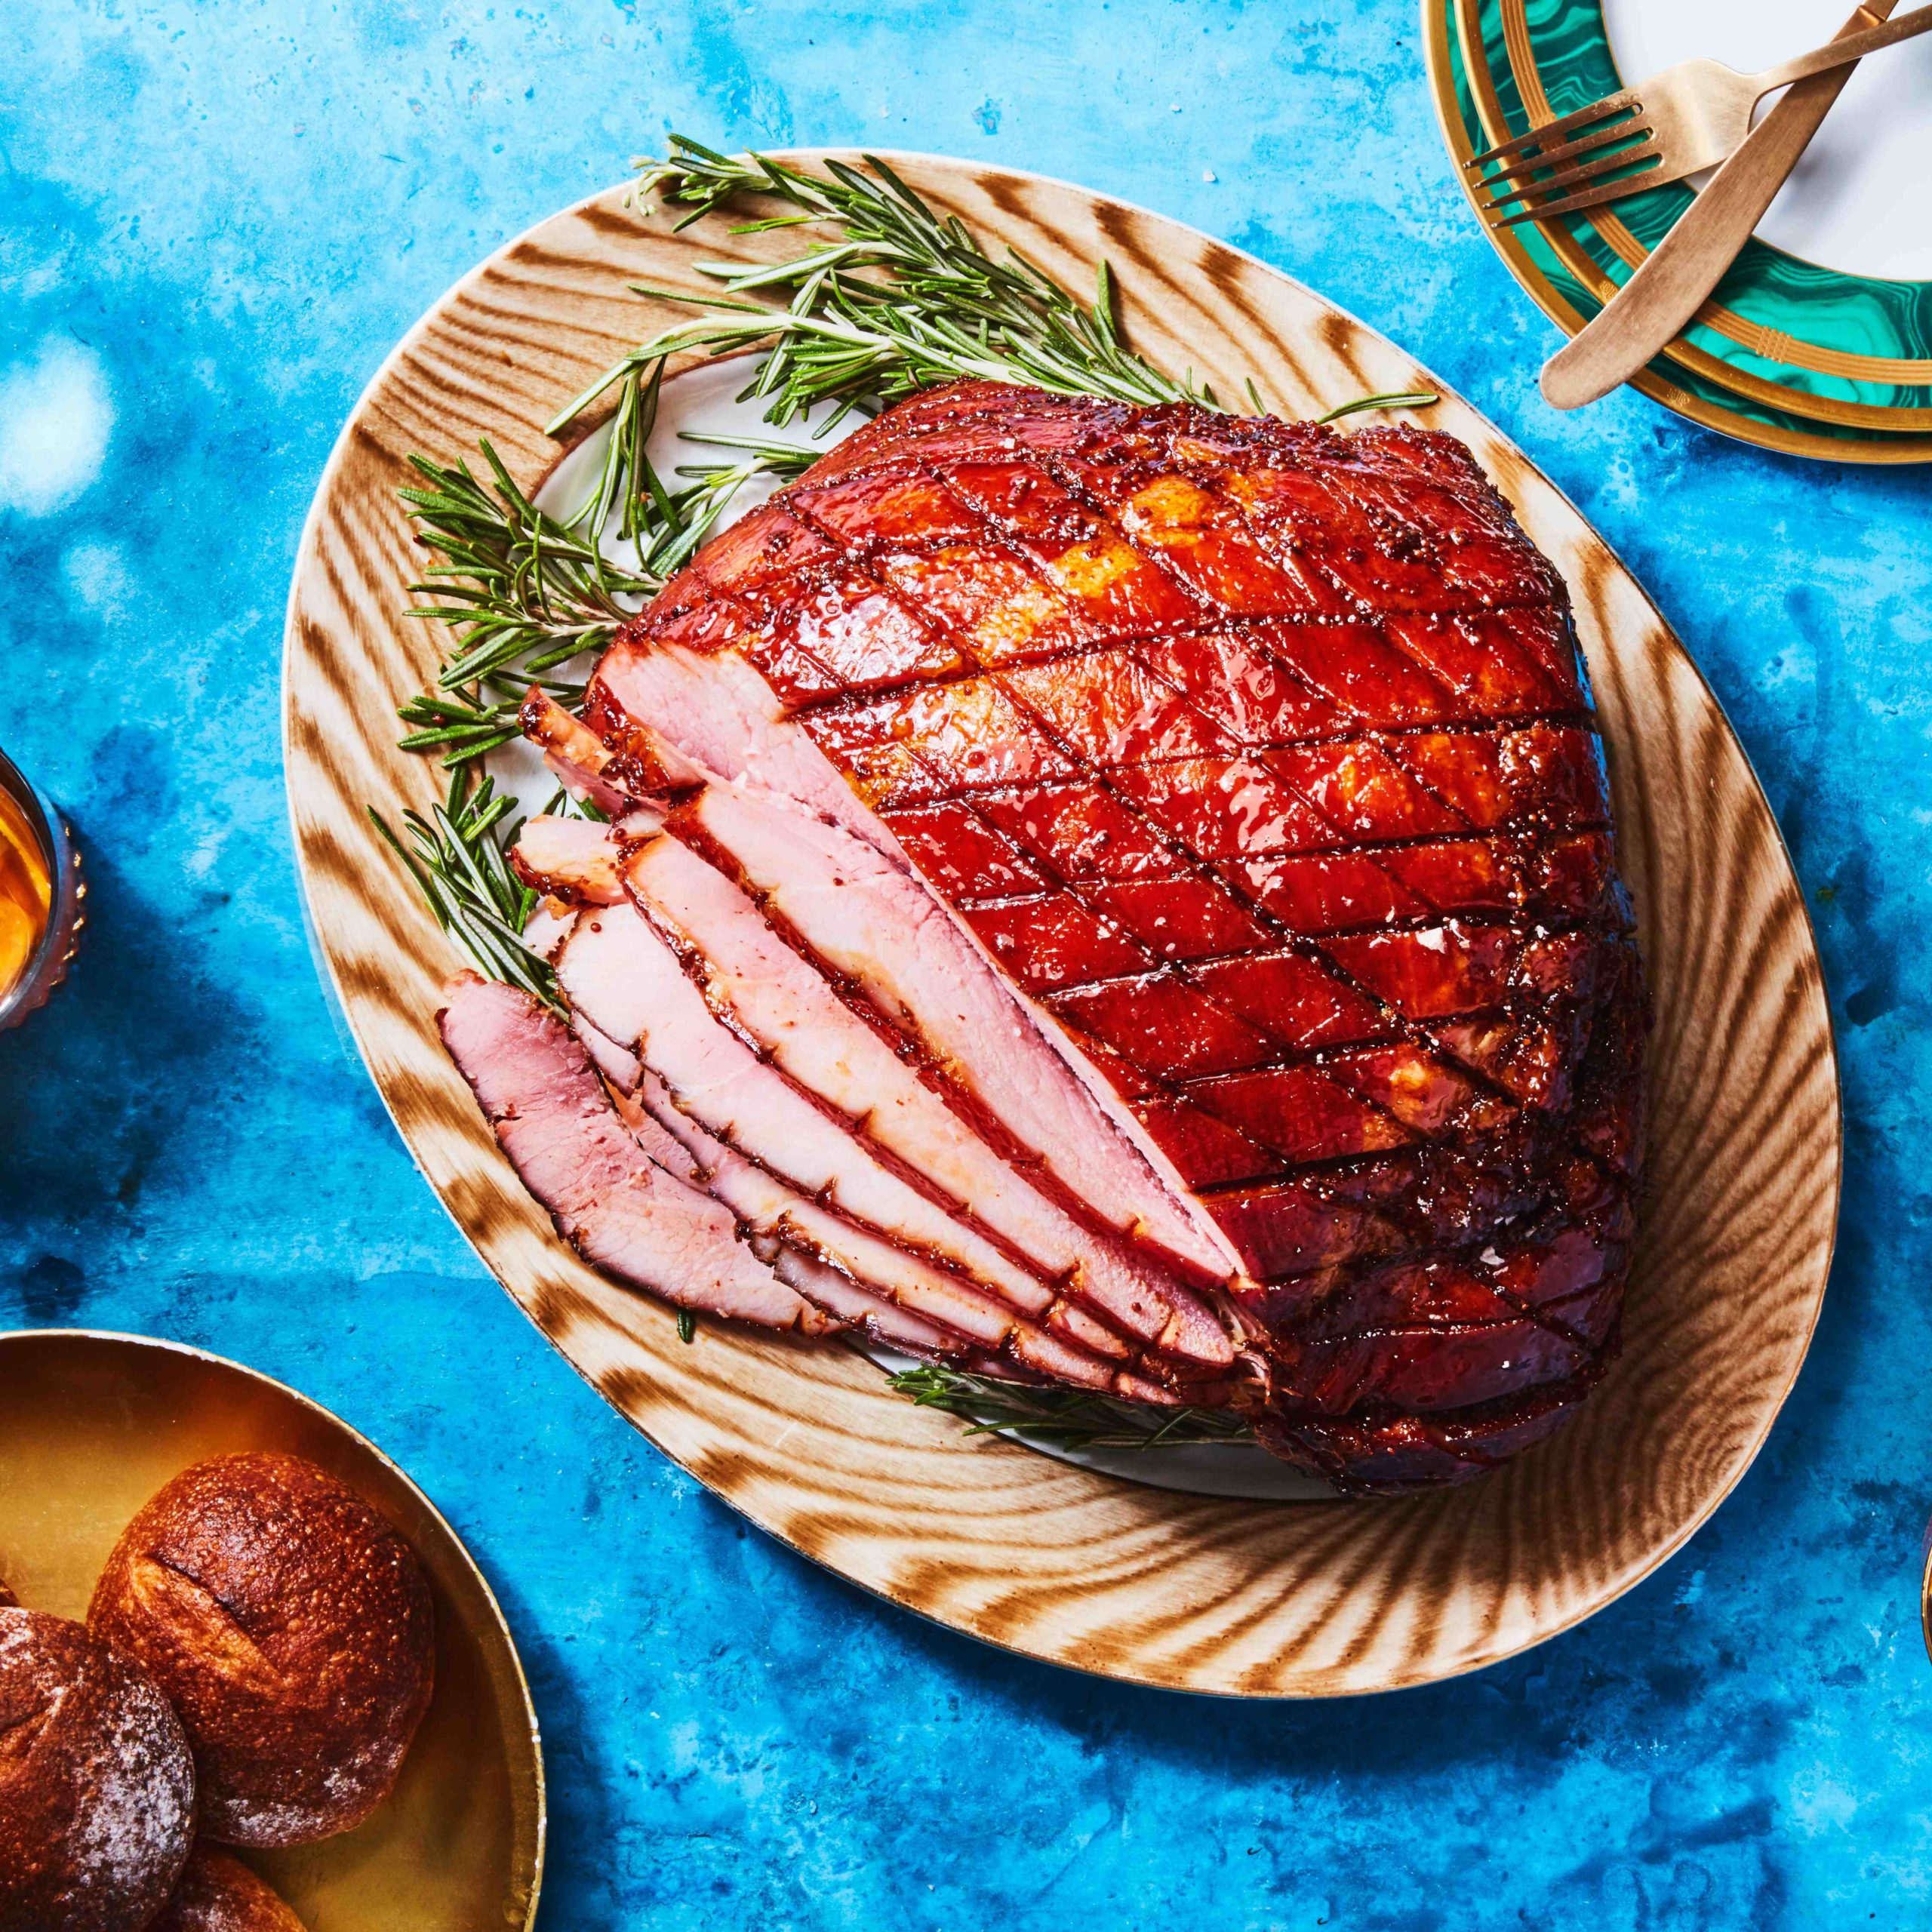 What is the best cut of ham to bake?